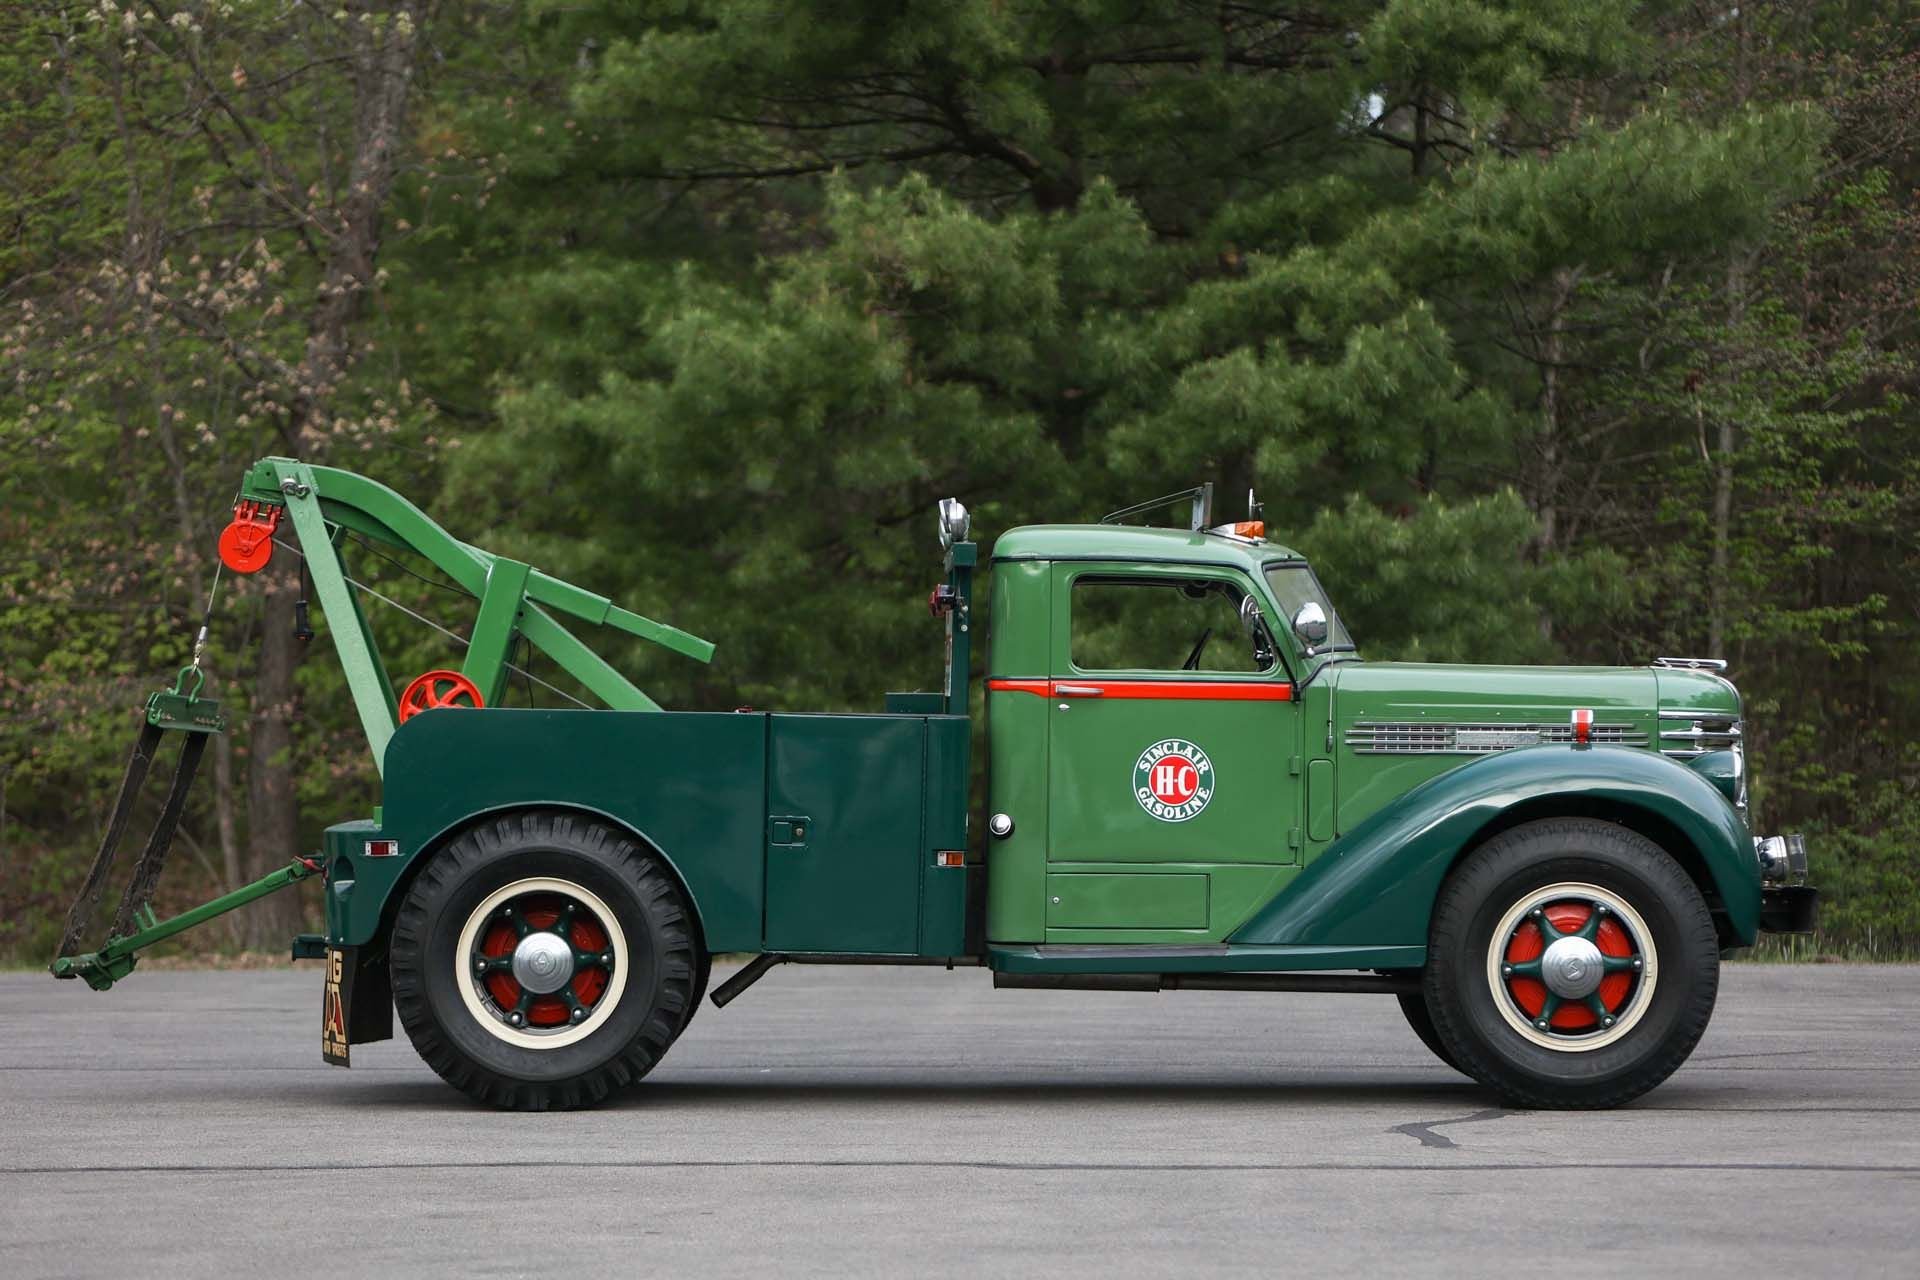 For Sale 1948 Diamond T 703-404HHS 'Sinclair' Tow Truck